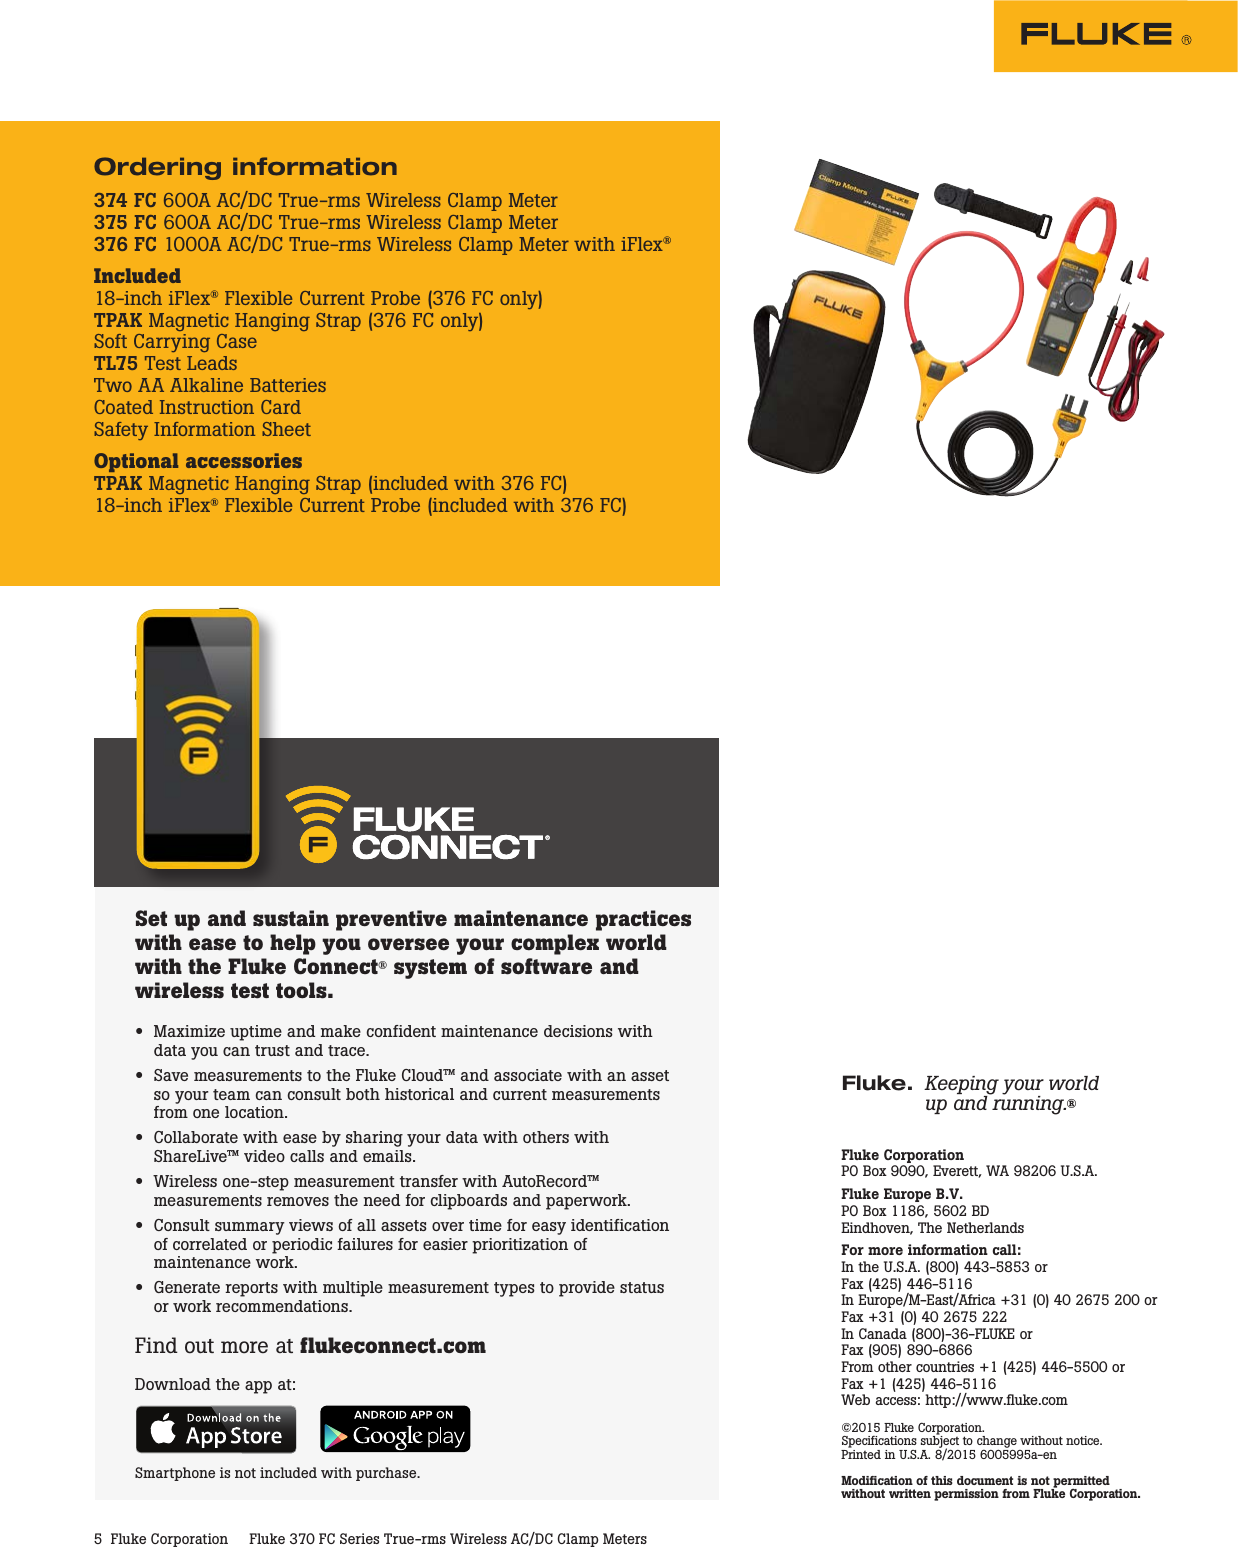 Page 5 of 5 - Fluke 370 FC Series True-rms Wireless AC/DC Clamp Meters